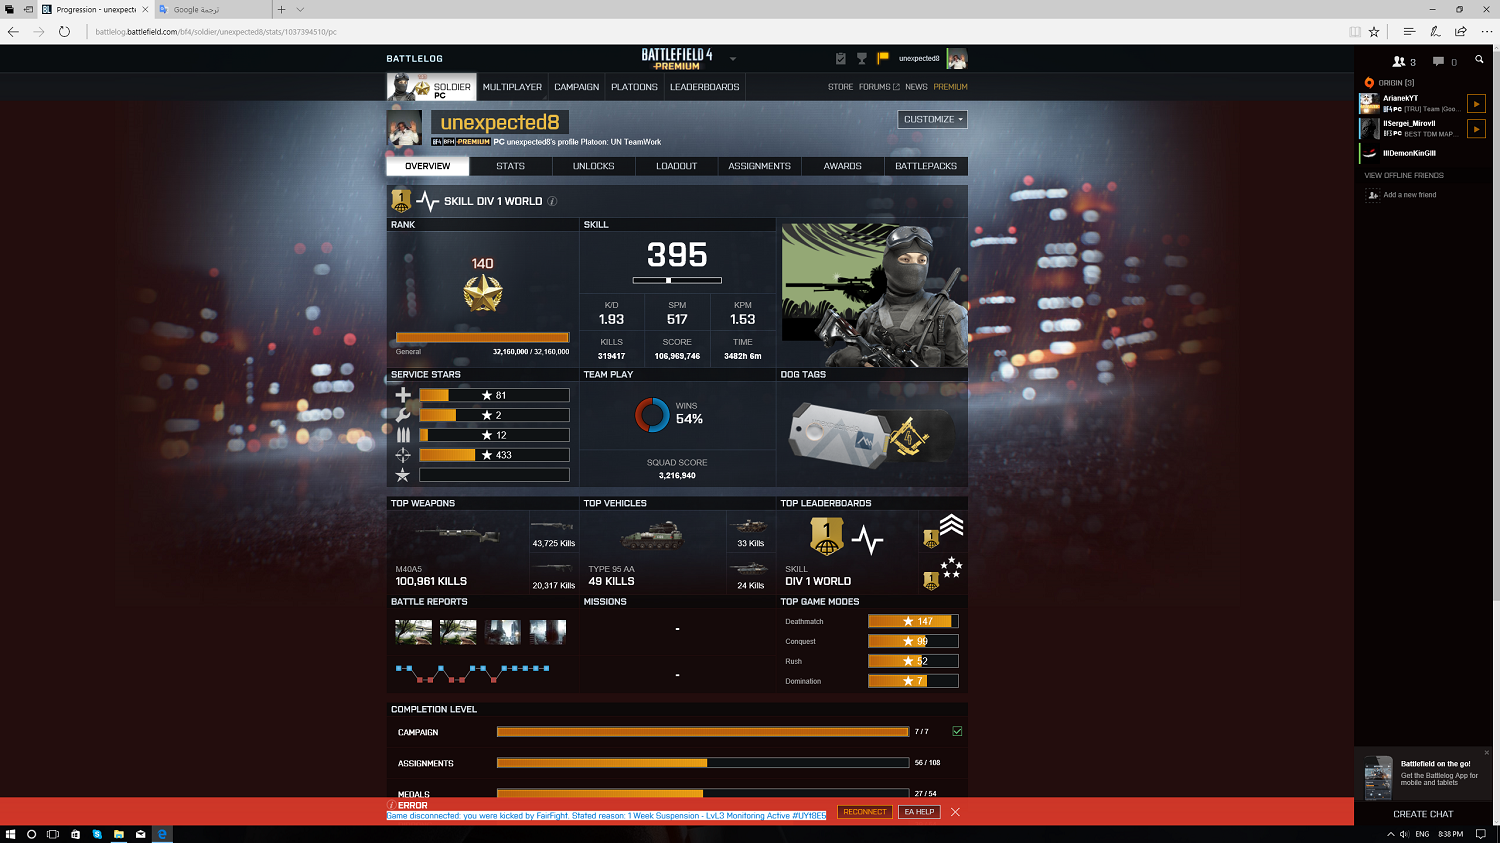 This is why I have to use battlelog for bf4. How do they even fake